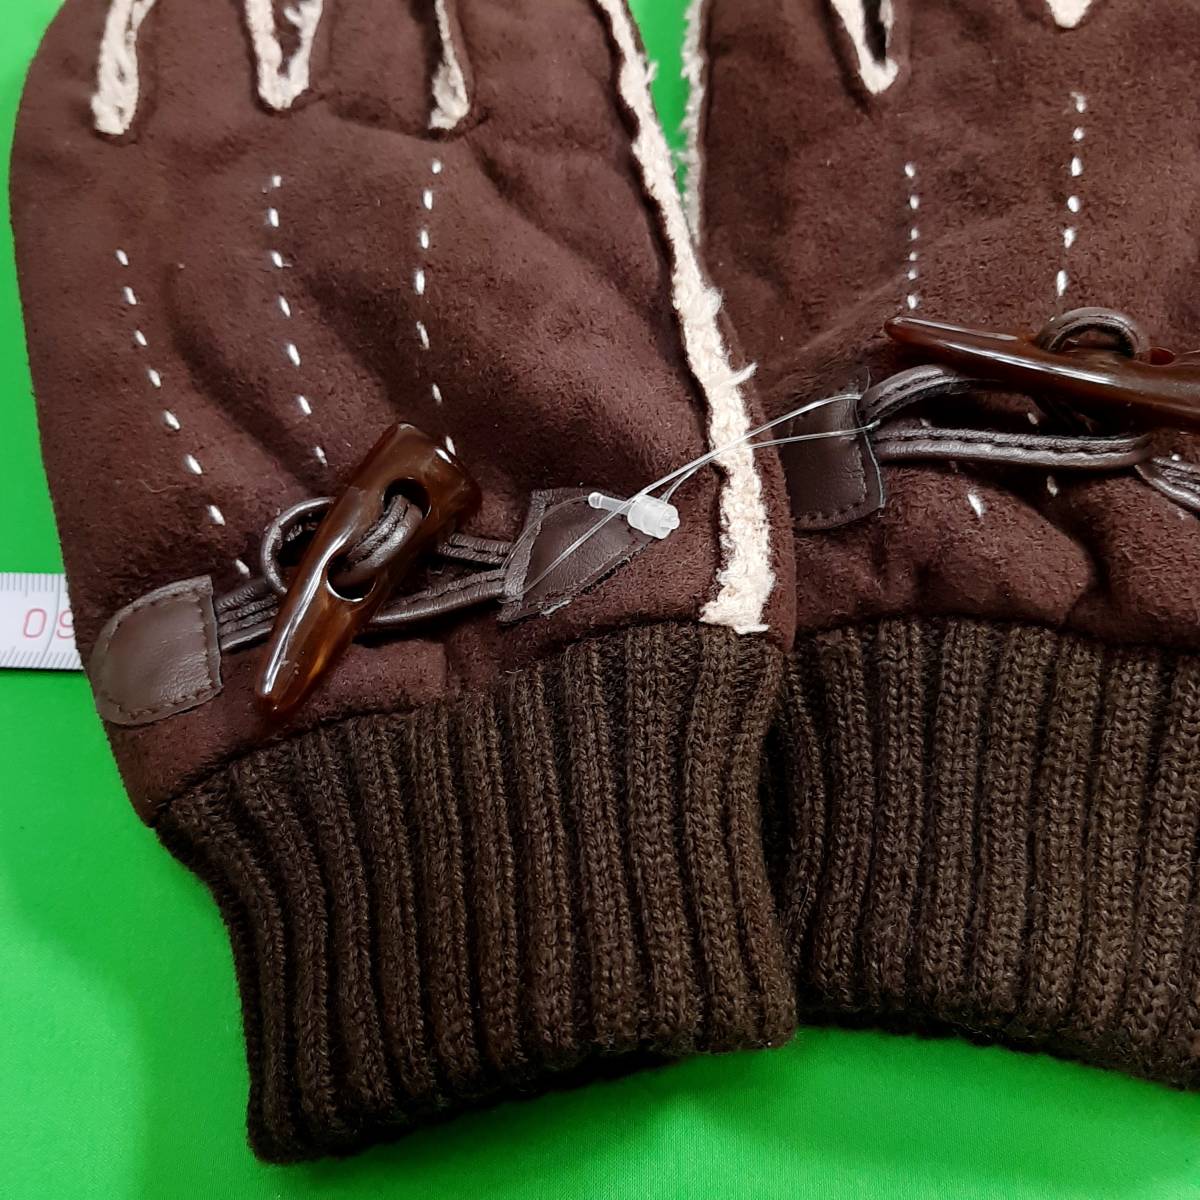 c5 new goods * free shipping * smartphone Touch correspondence protection against cold knitted & reverse side nappy boa attaching warm suede style gloves *5 fingers * dark brown lady's L size 